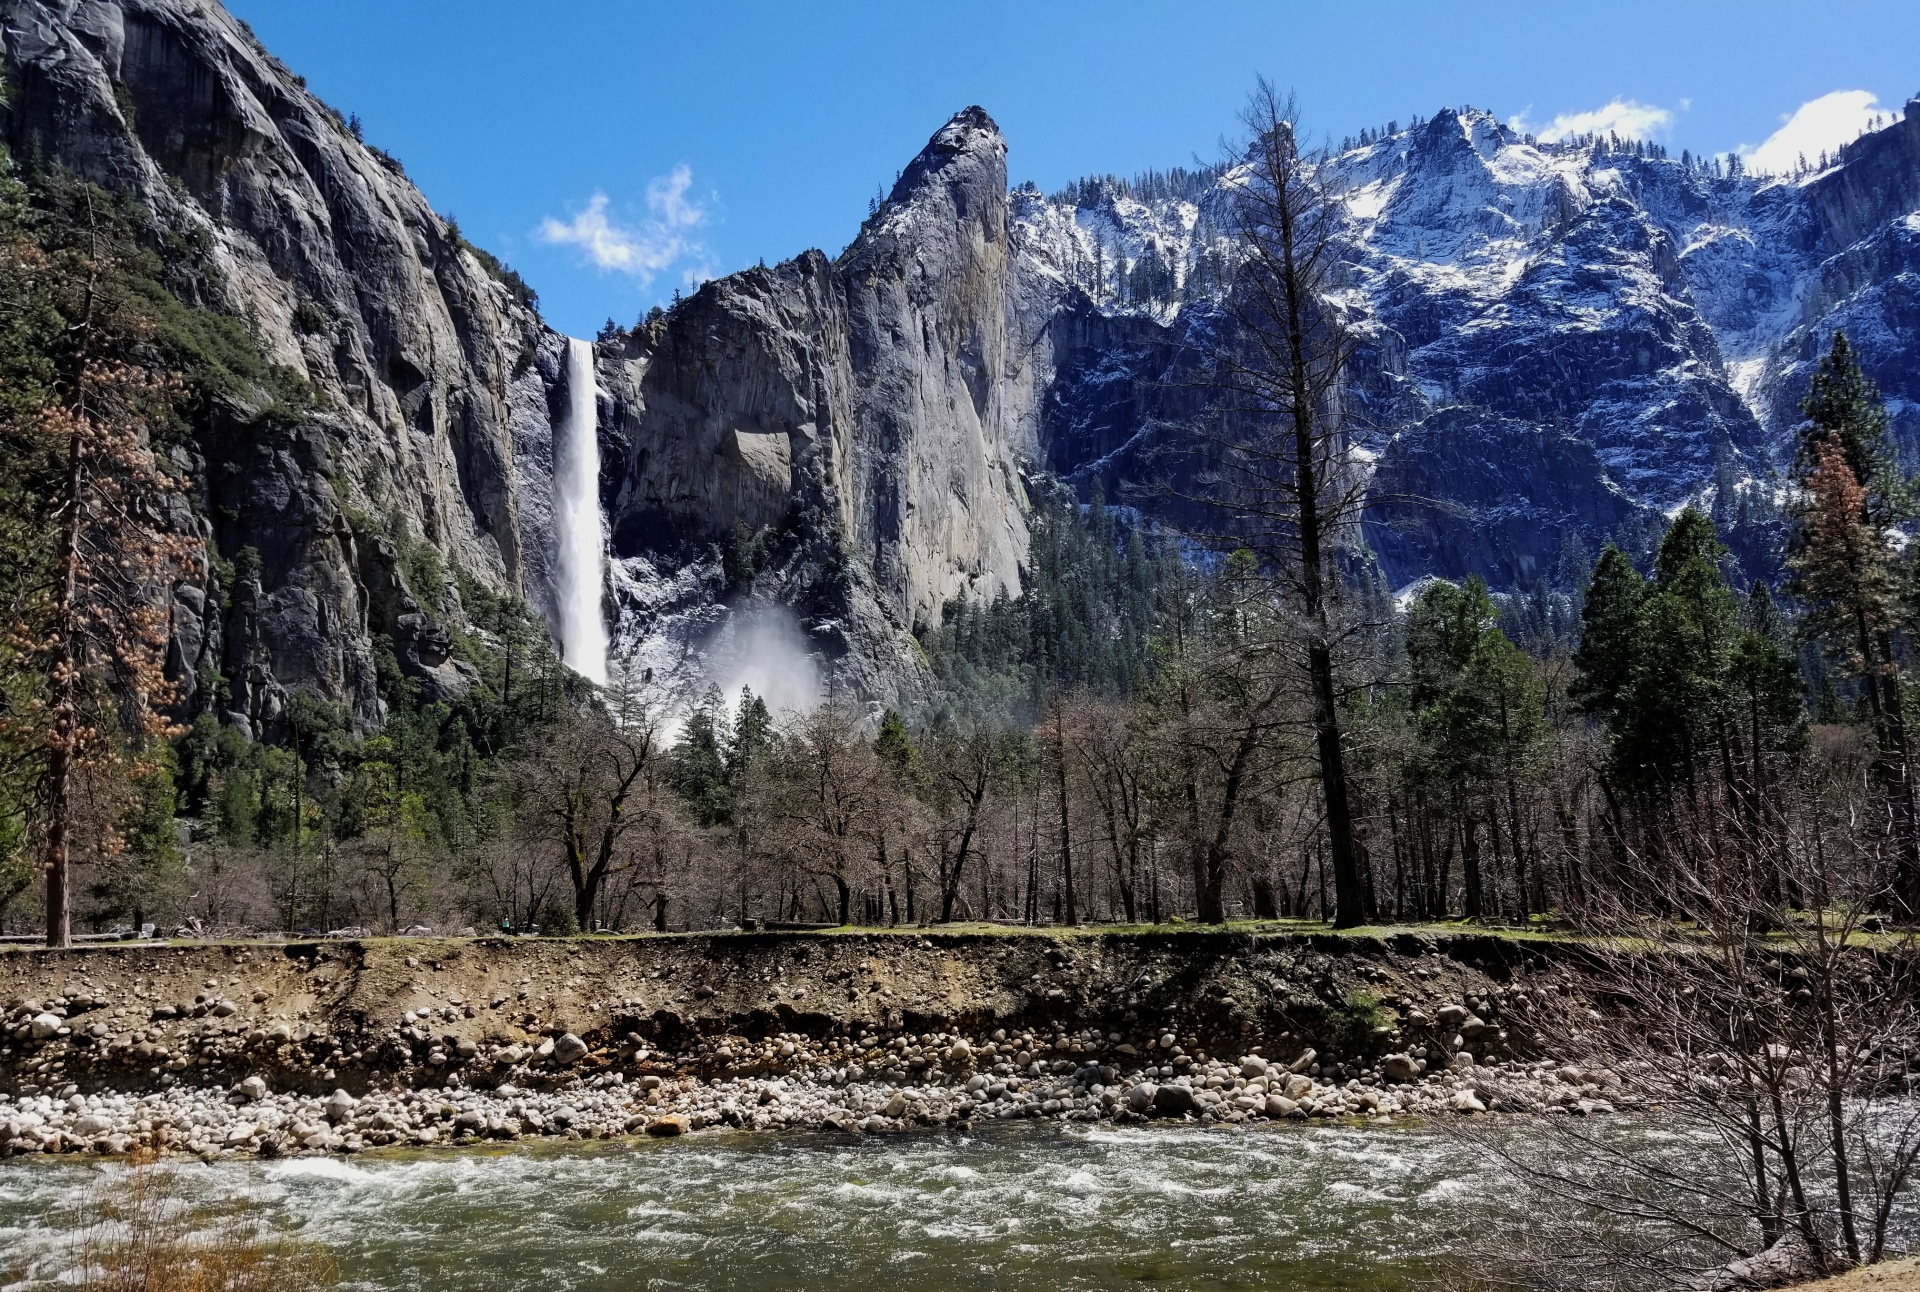 Merced River flows next to the road with waterfalls falling from snow capped mountains in Yosemite.